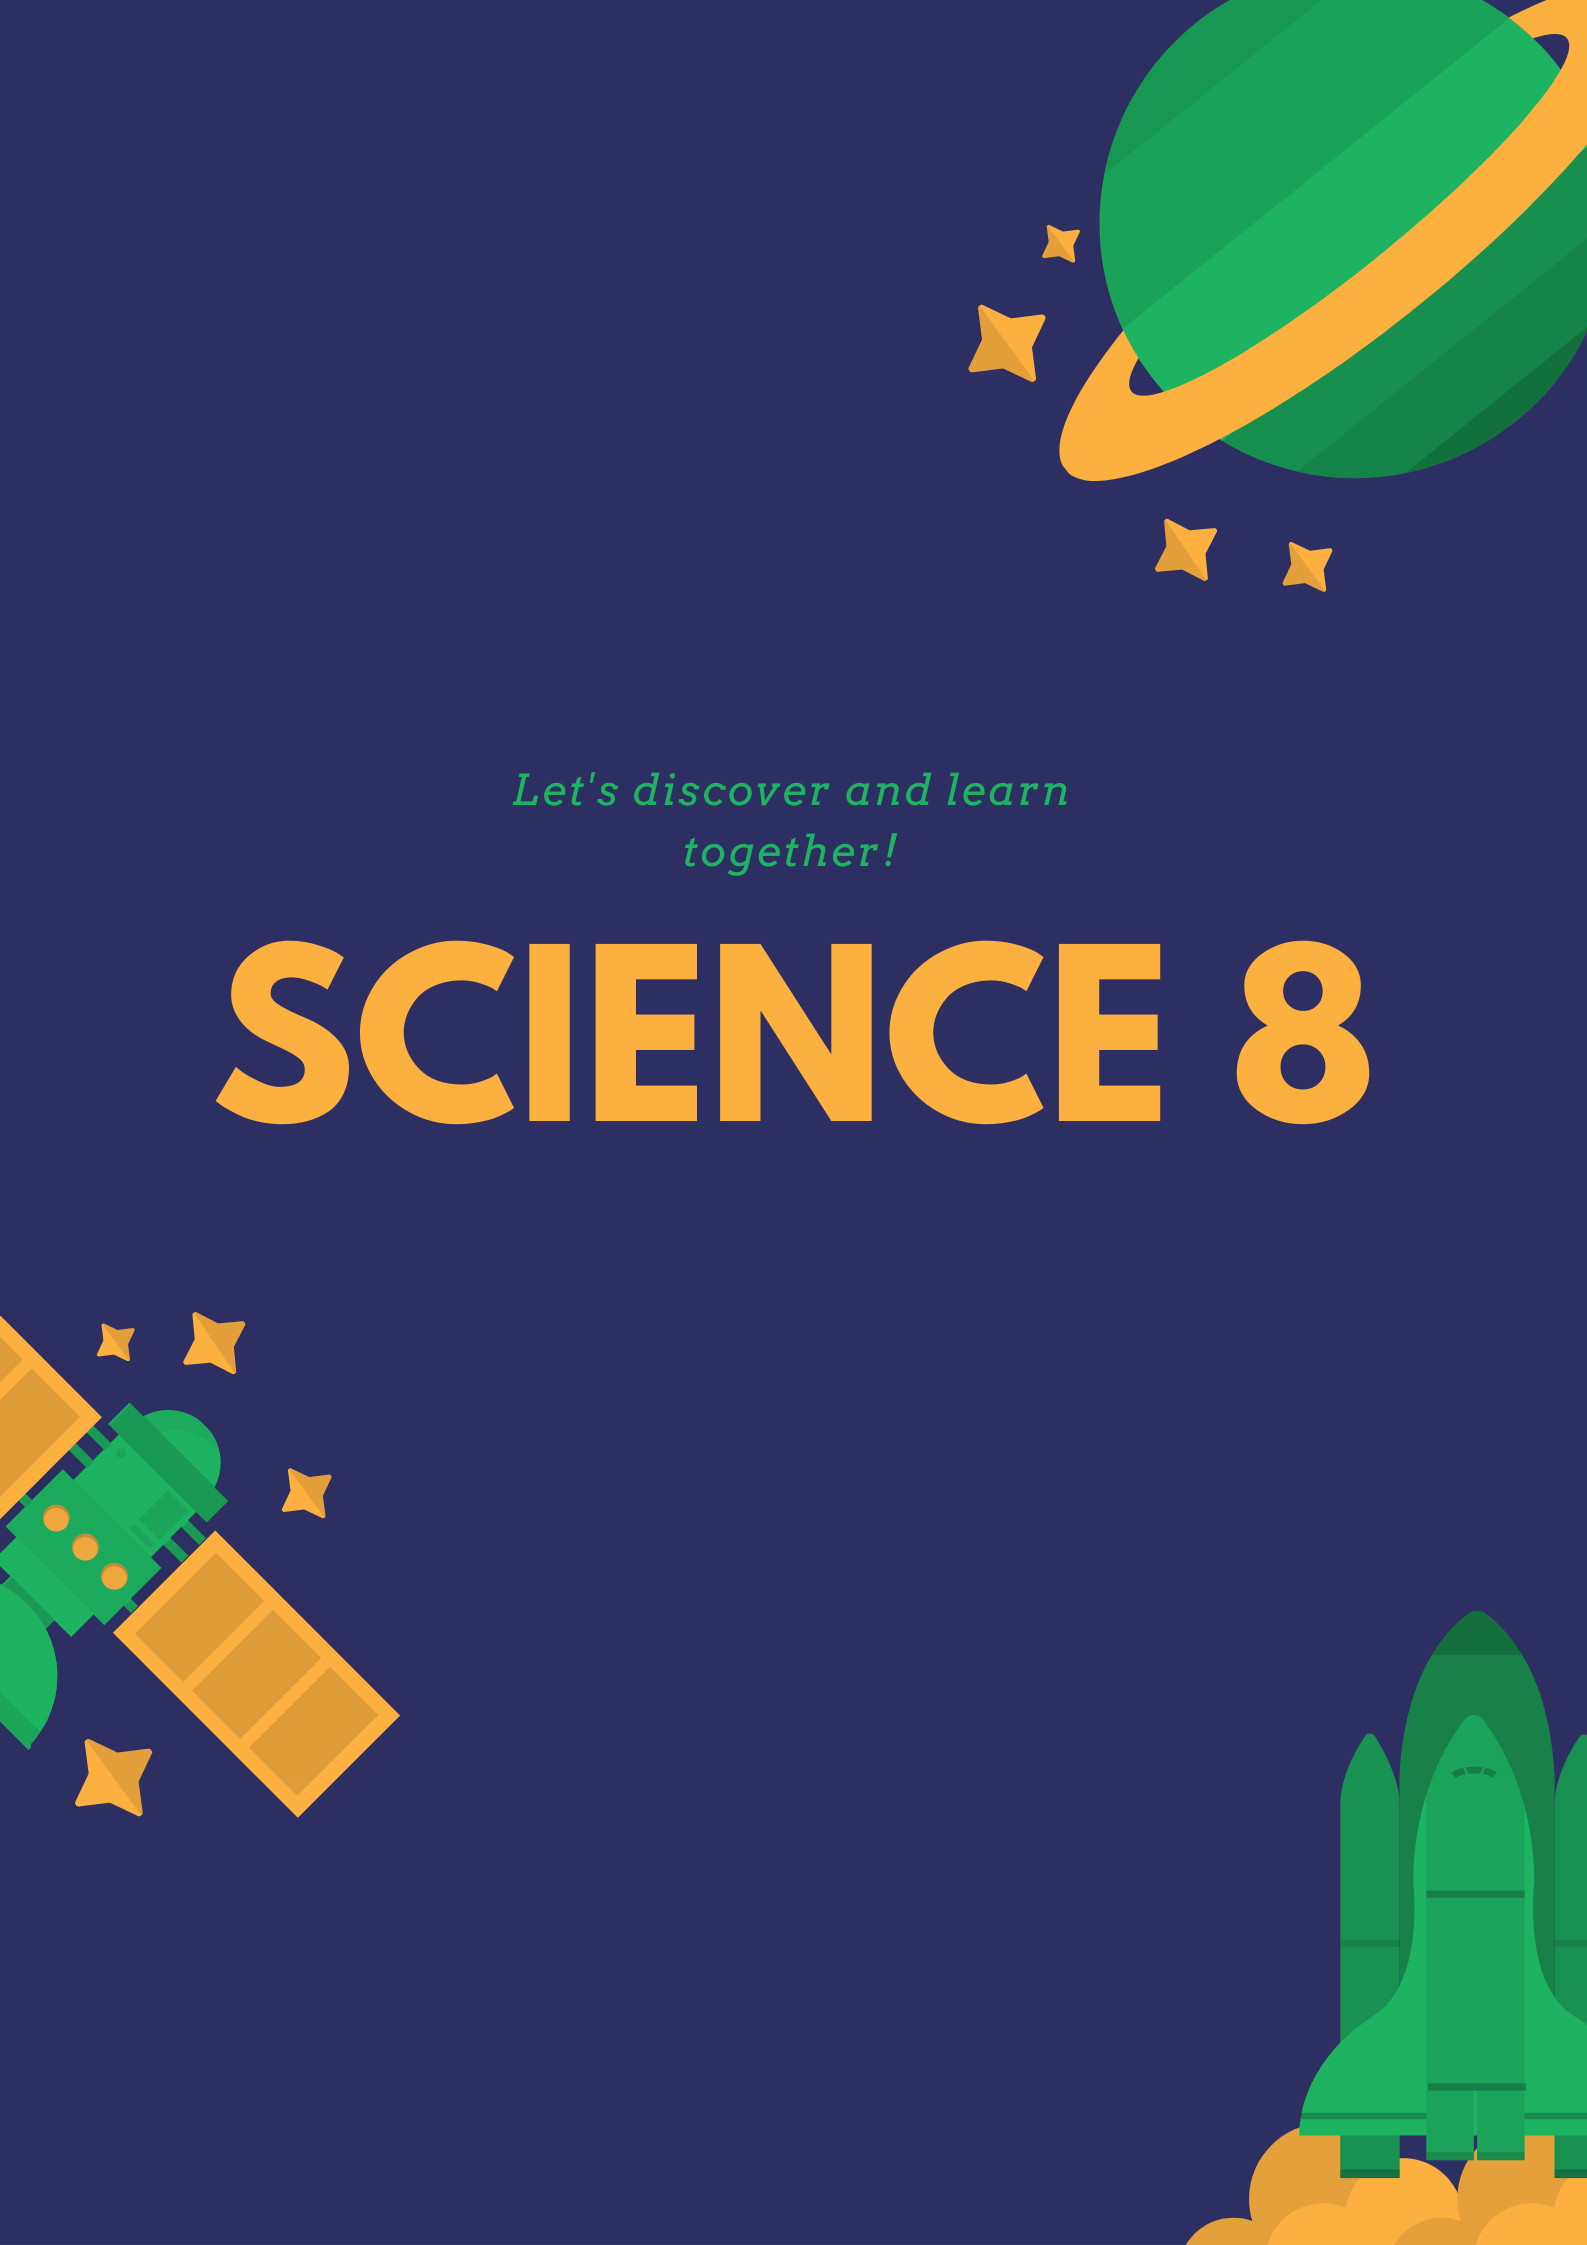 SCIENCE 8